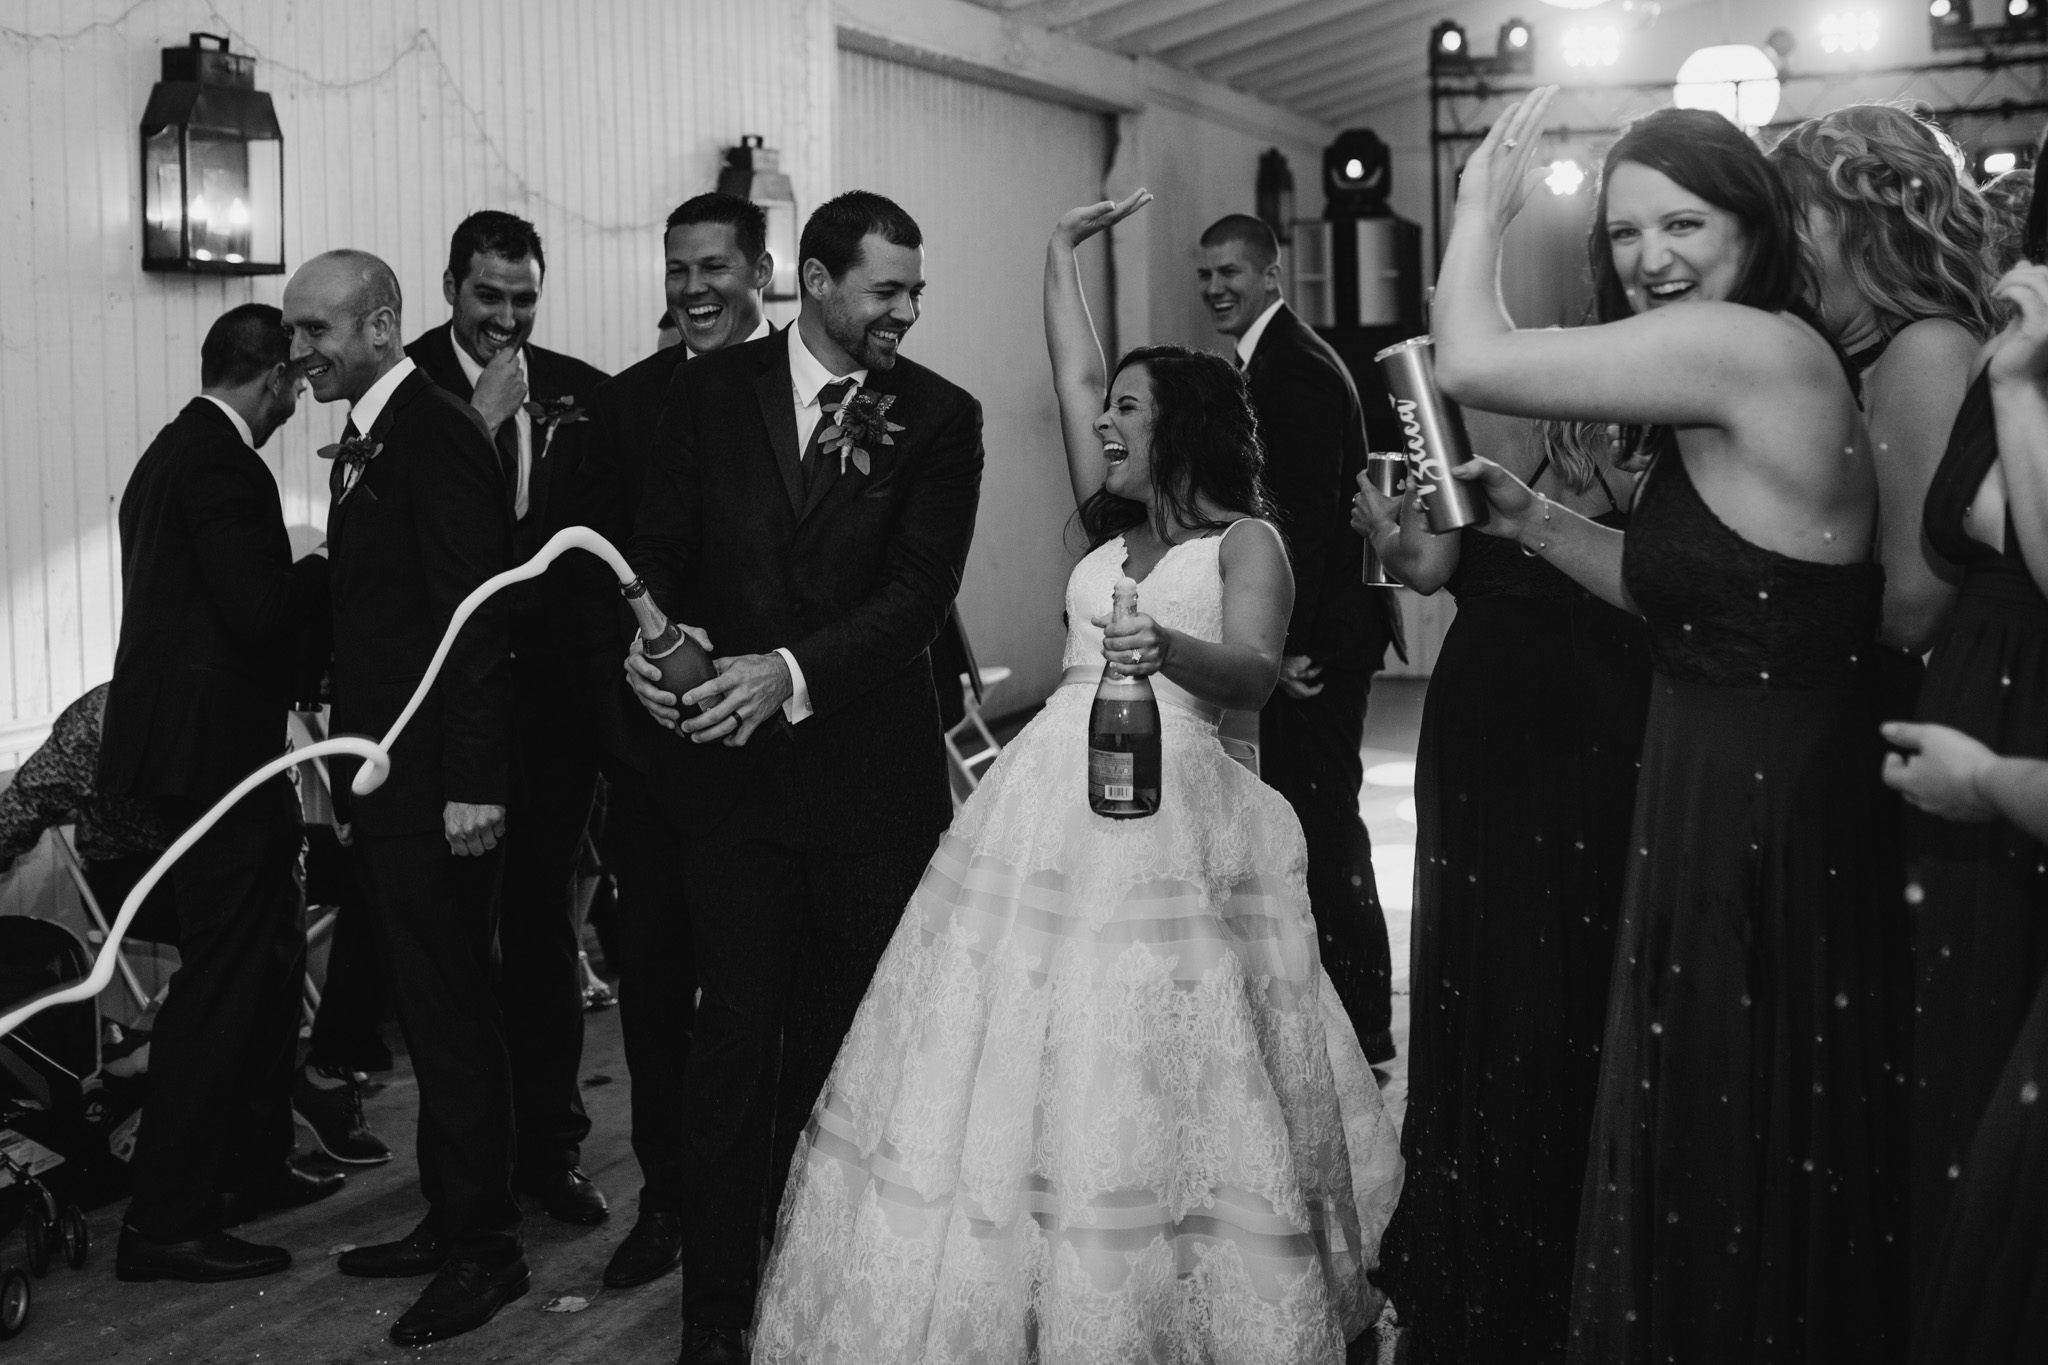 Popping champagne in celebration during an autumn wedding.